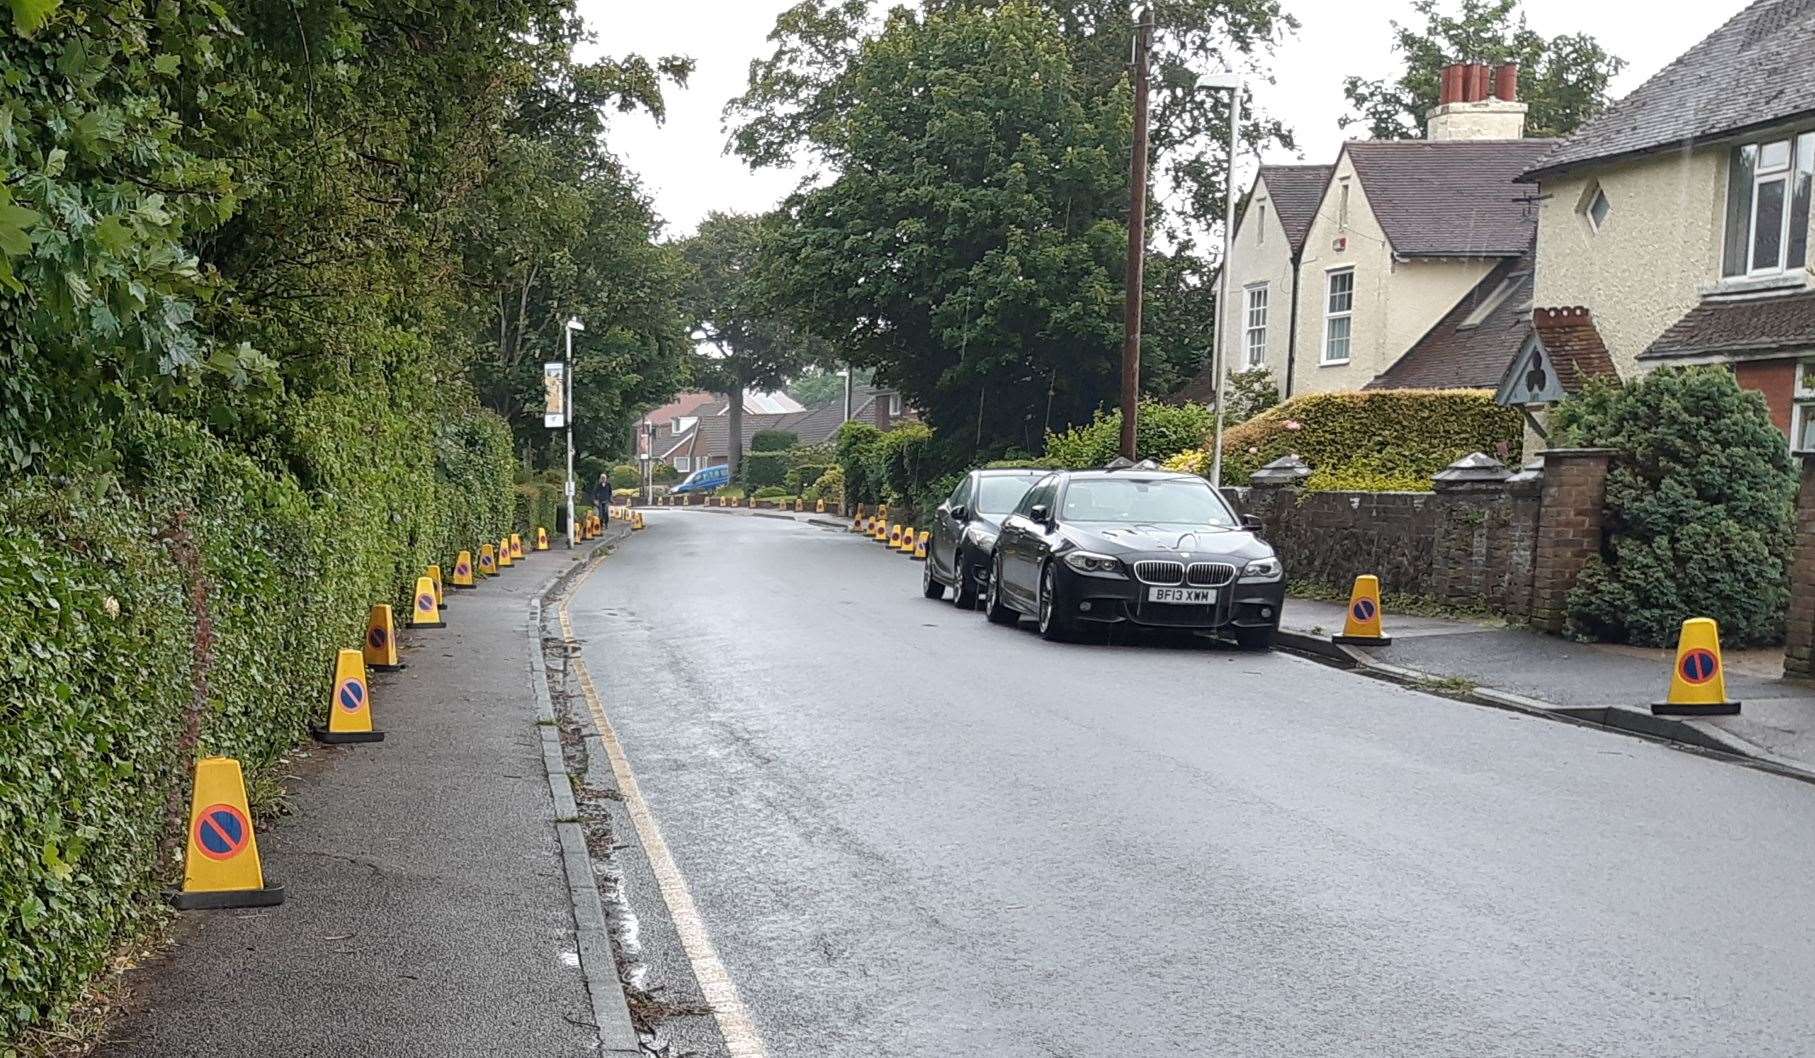 Traffic cones ready to be placed for The Open, St George's Road, Sandwich. Picture: Sam Lennon